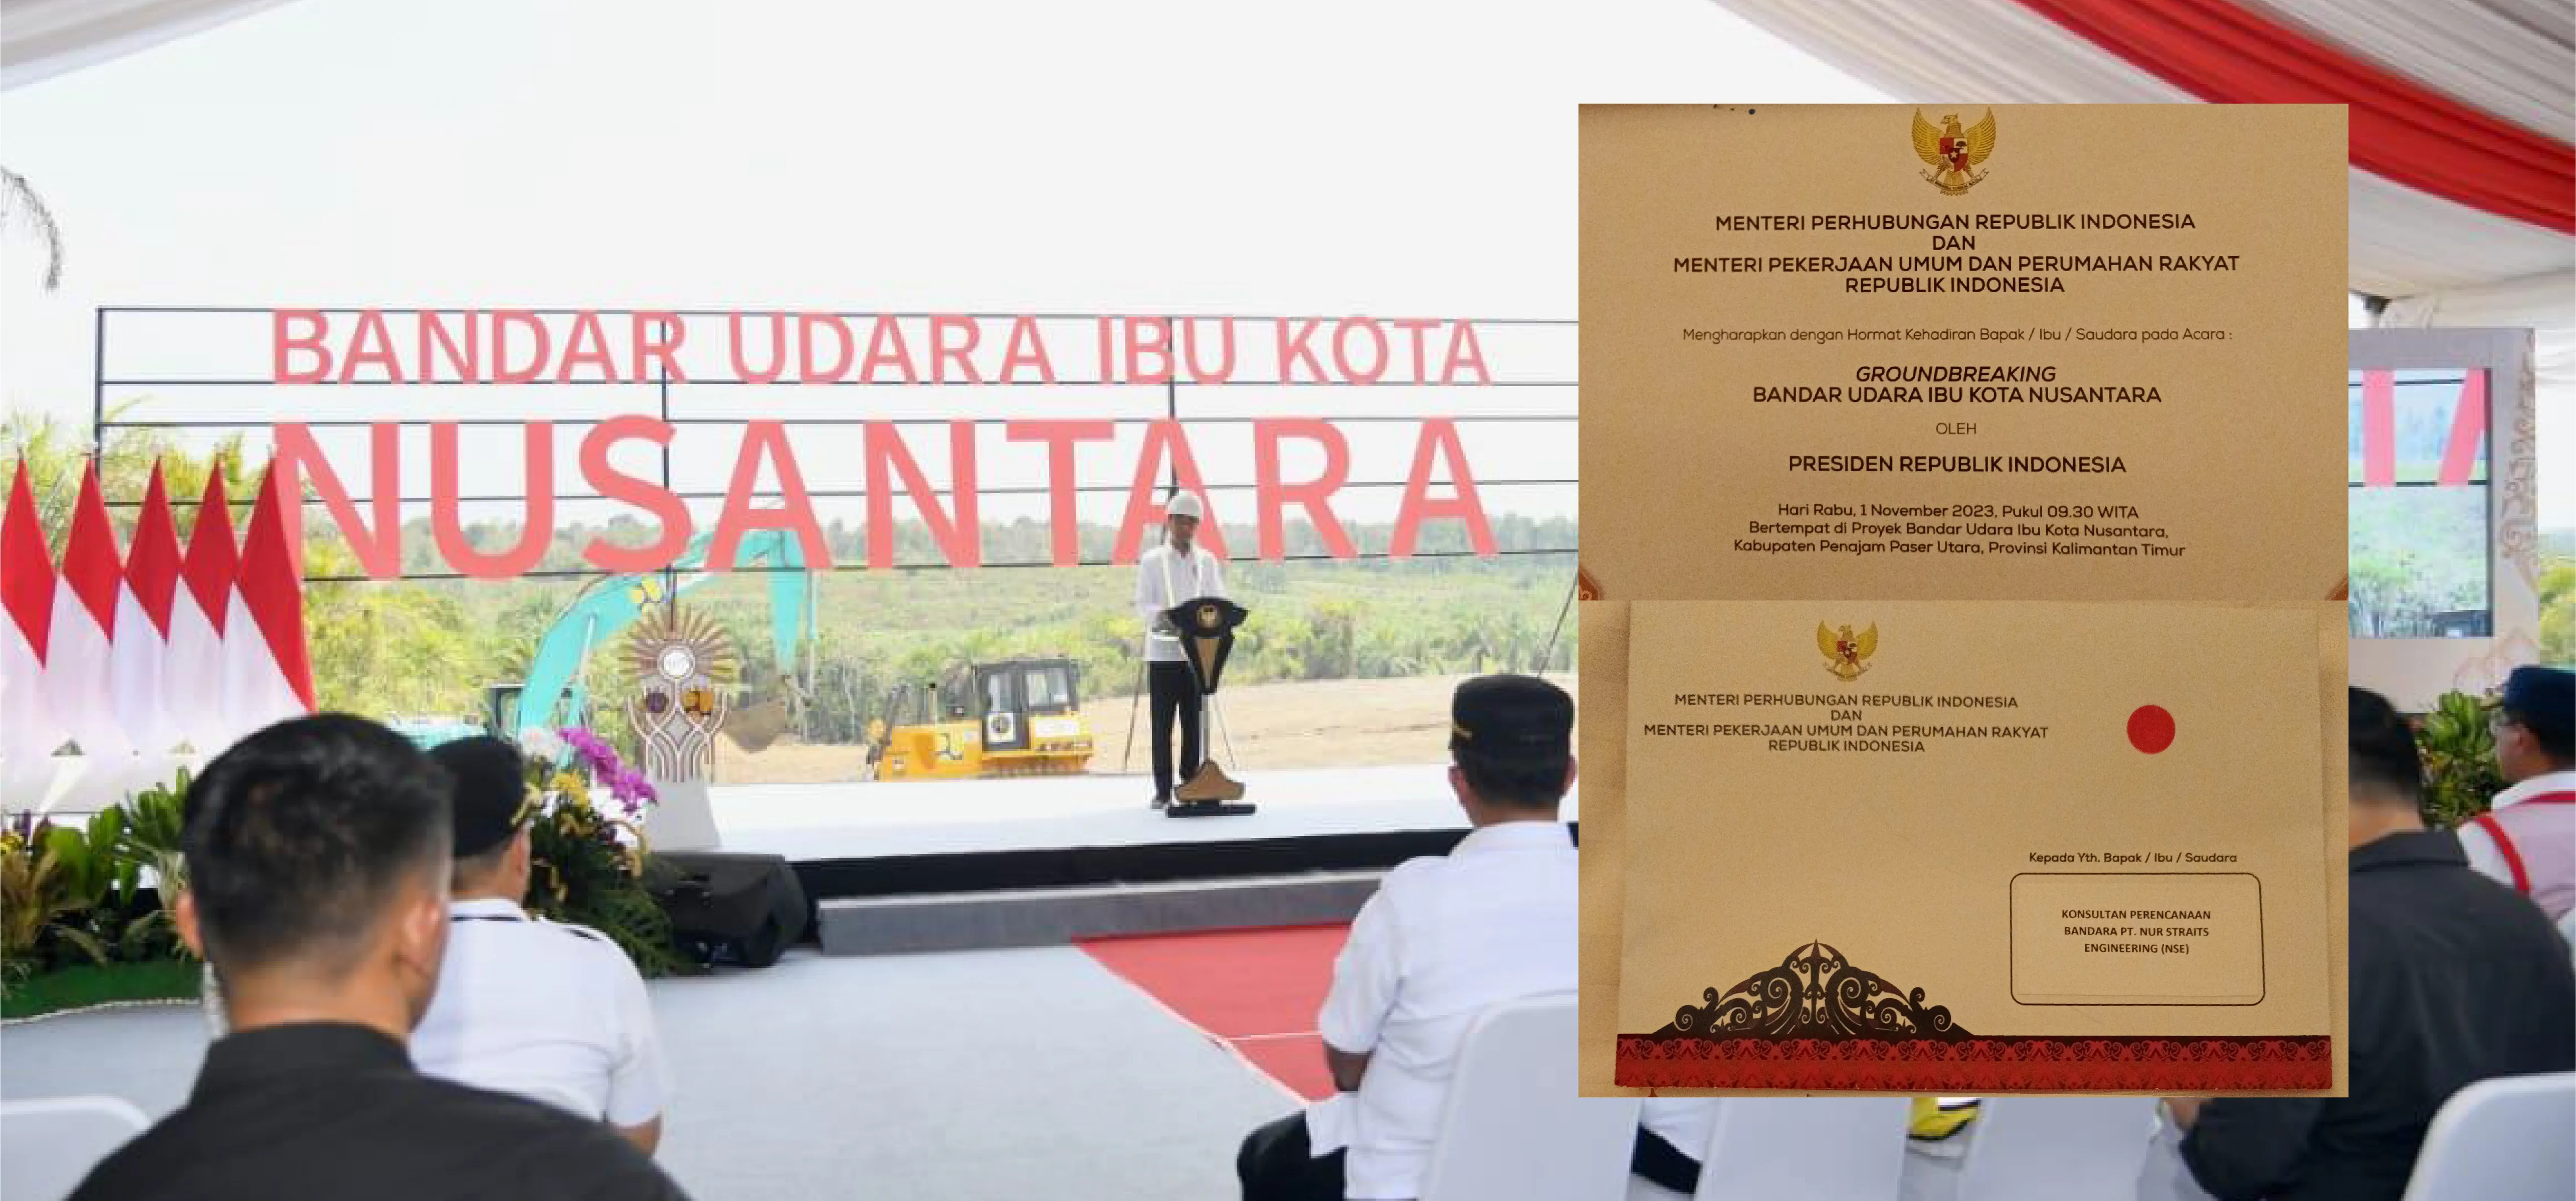 NSE and the Minister of Advanced Indonesian Cabinet Accompany President Jokowi in Groundbreaking Activities at VVIP IKN Airport